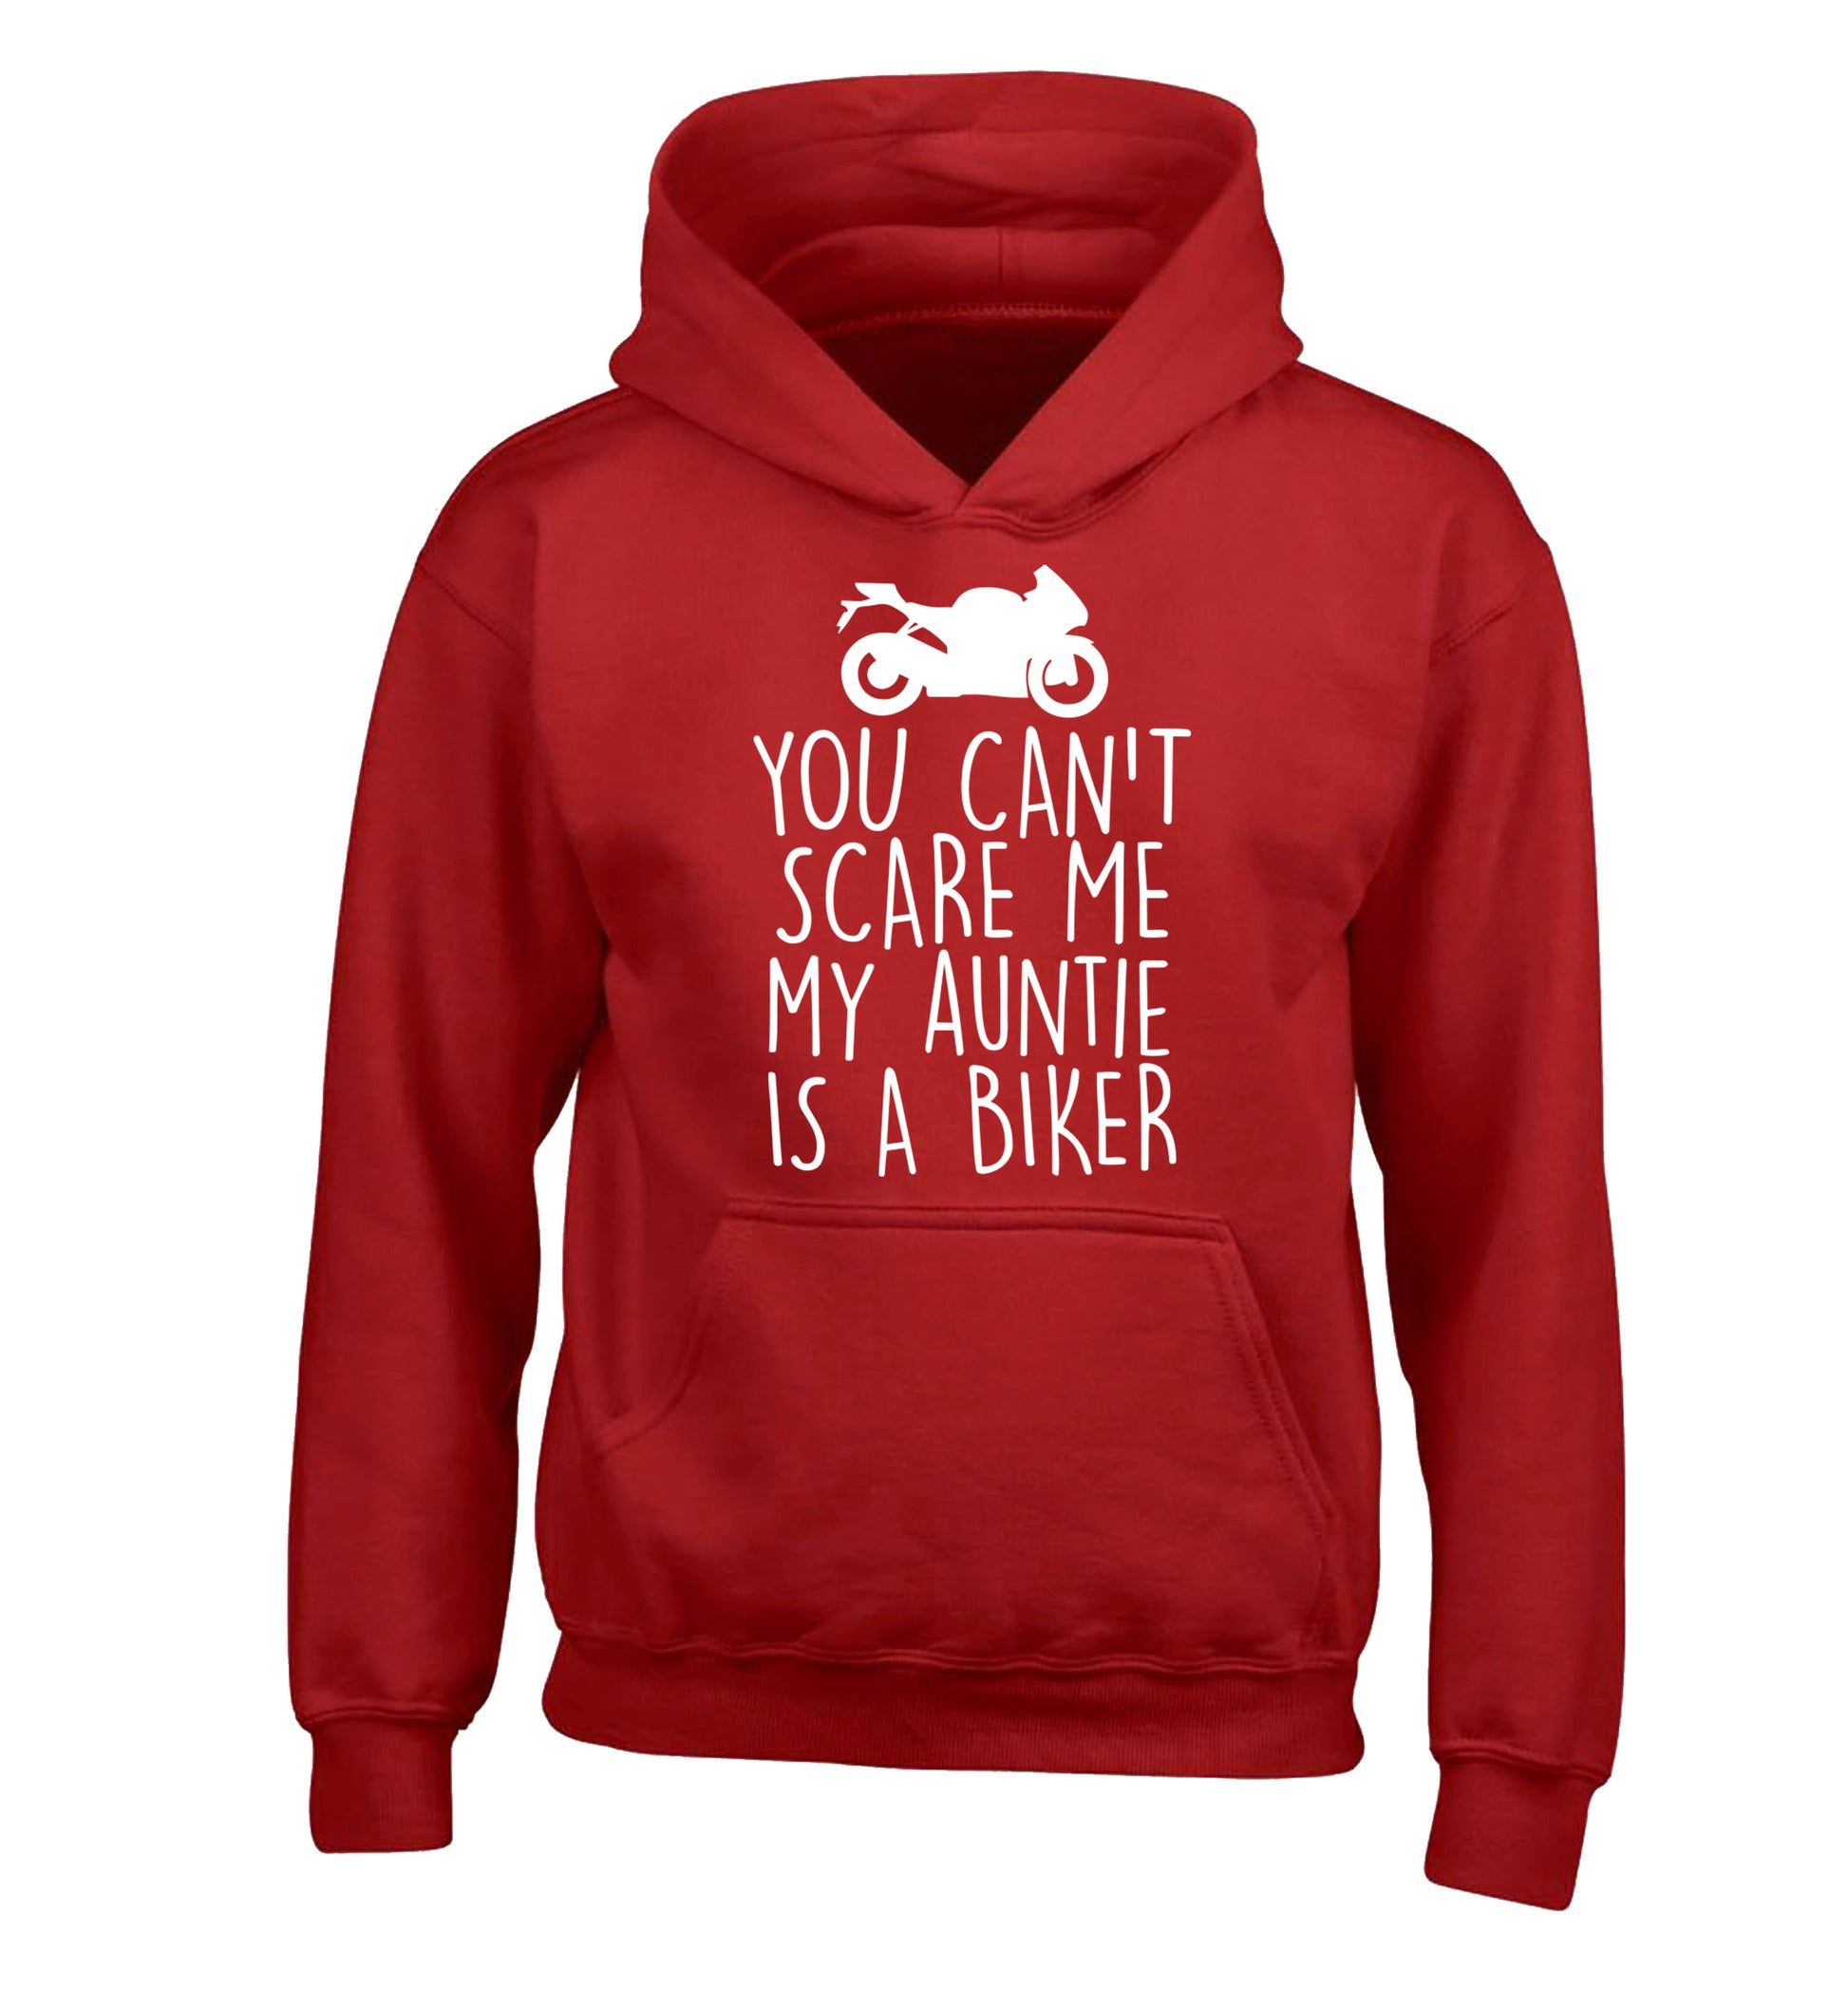 You can't scare me my auntie is a biker children's red hoodie 12-13 Years